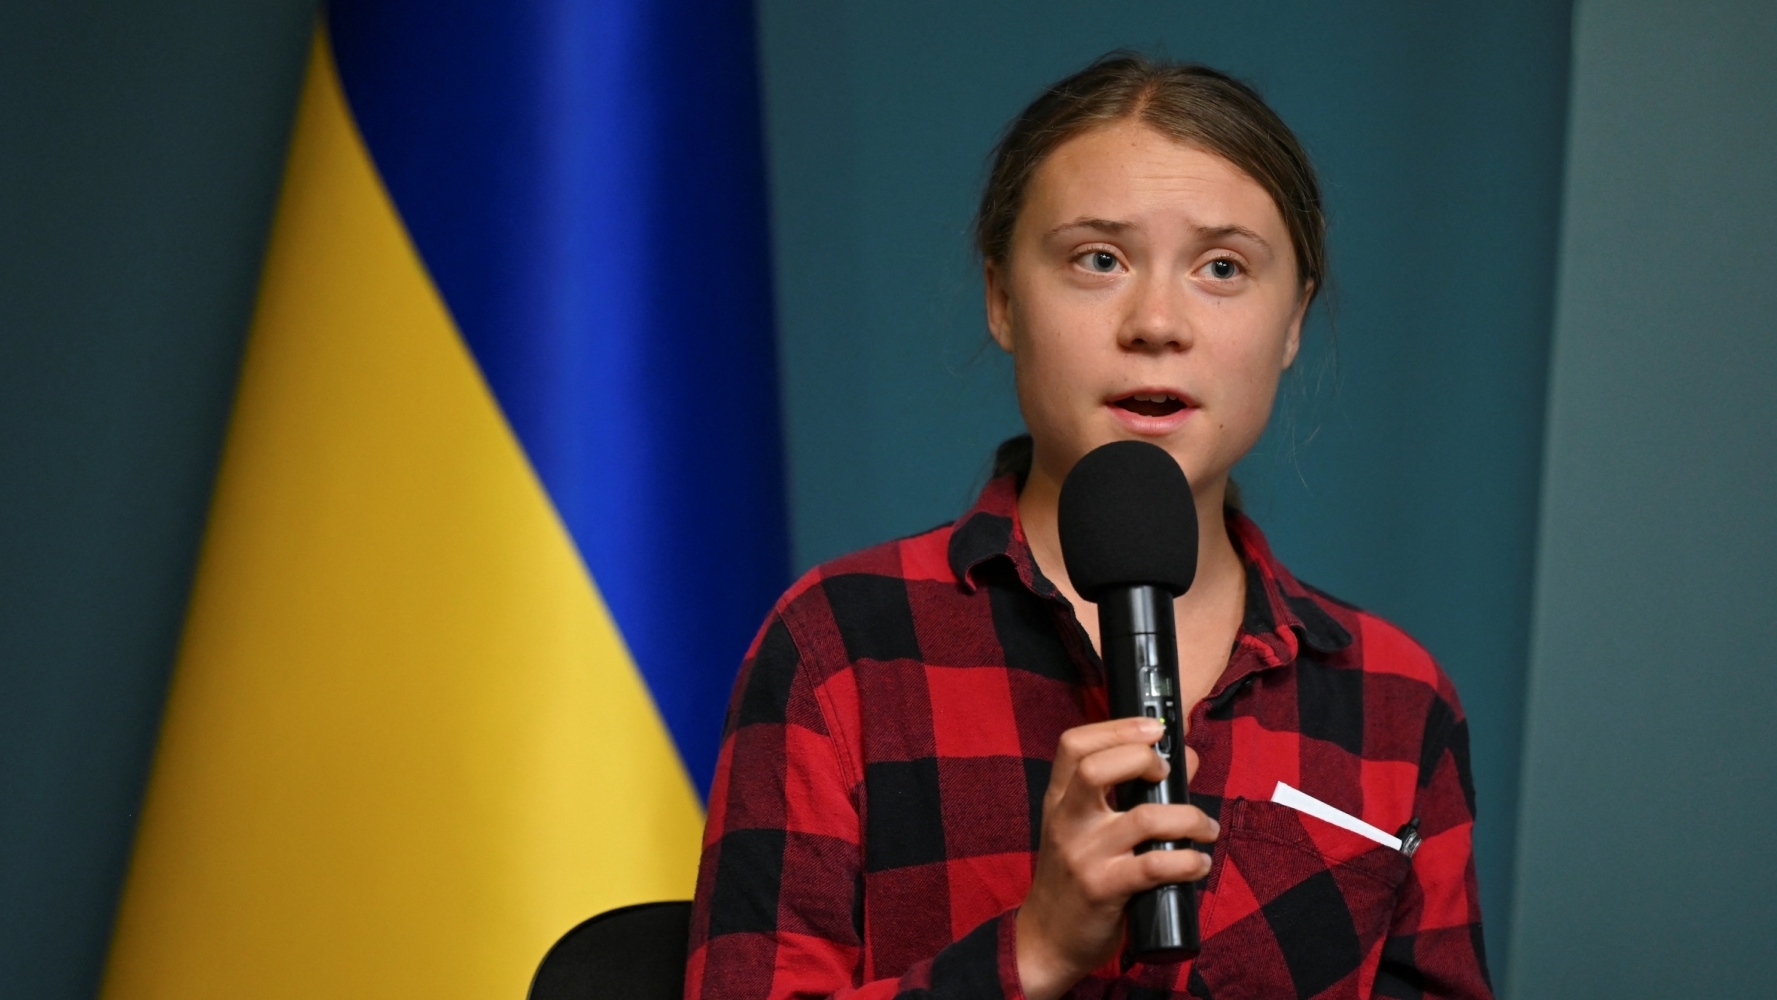 Greta Thunberg met Zelensky in Kyiv. They launched a new initiative